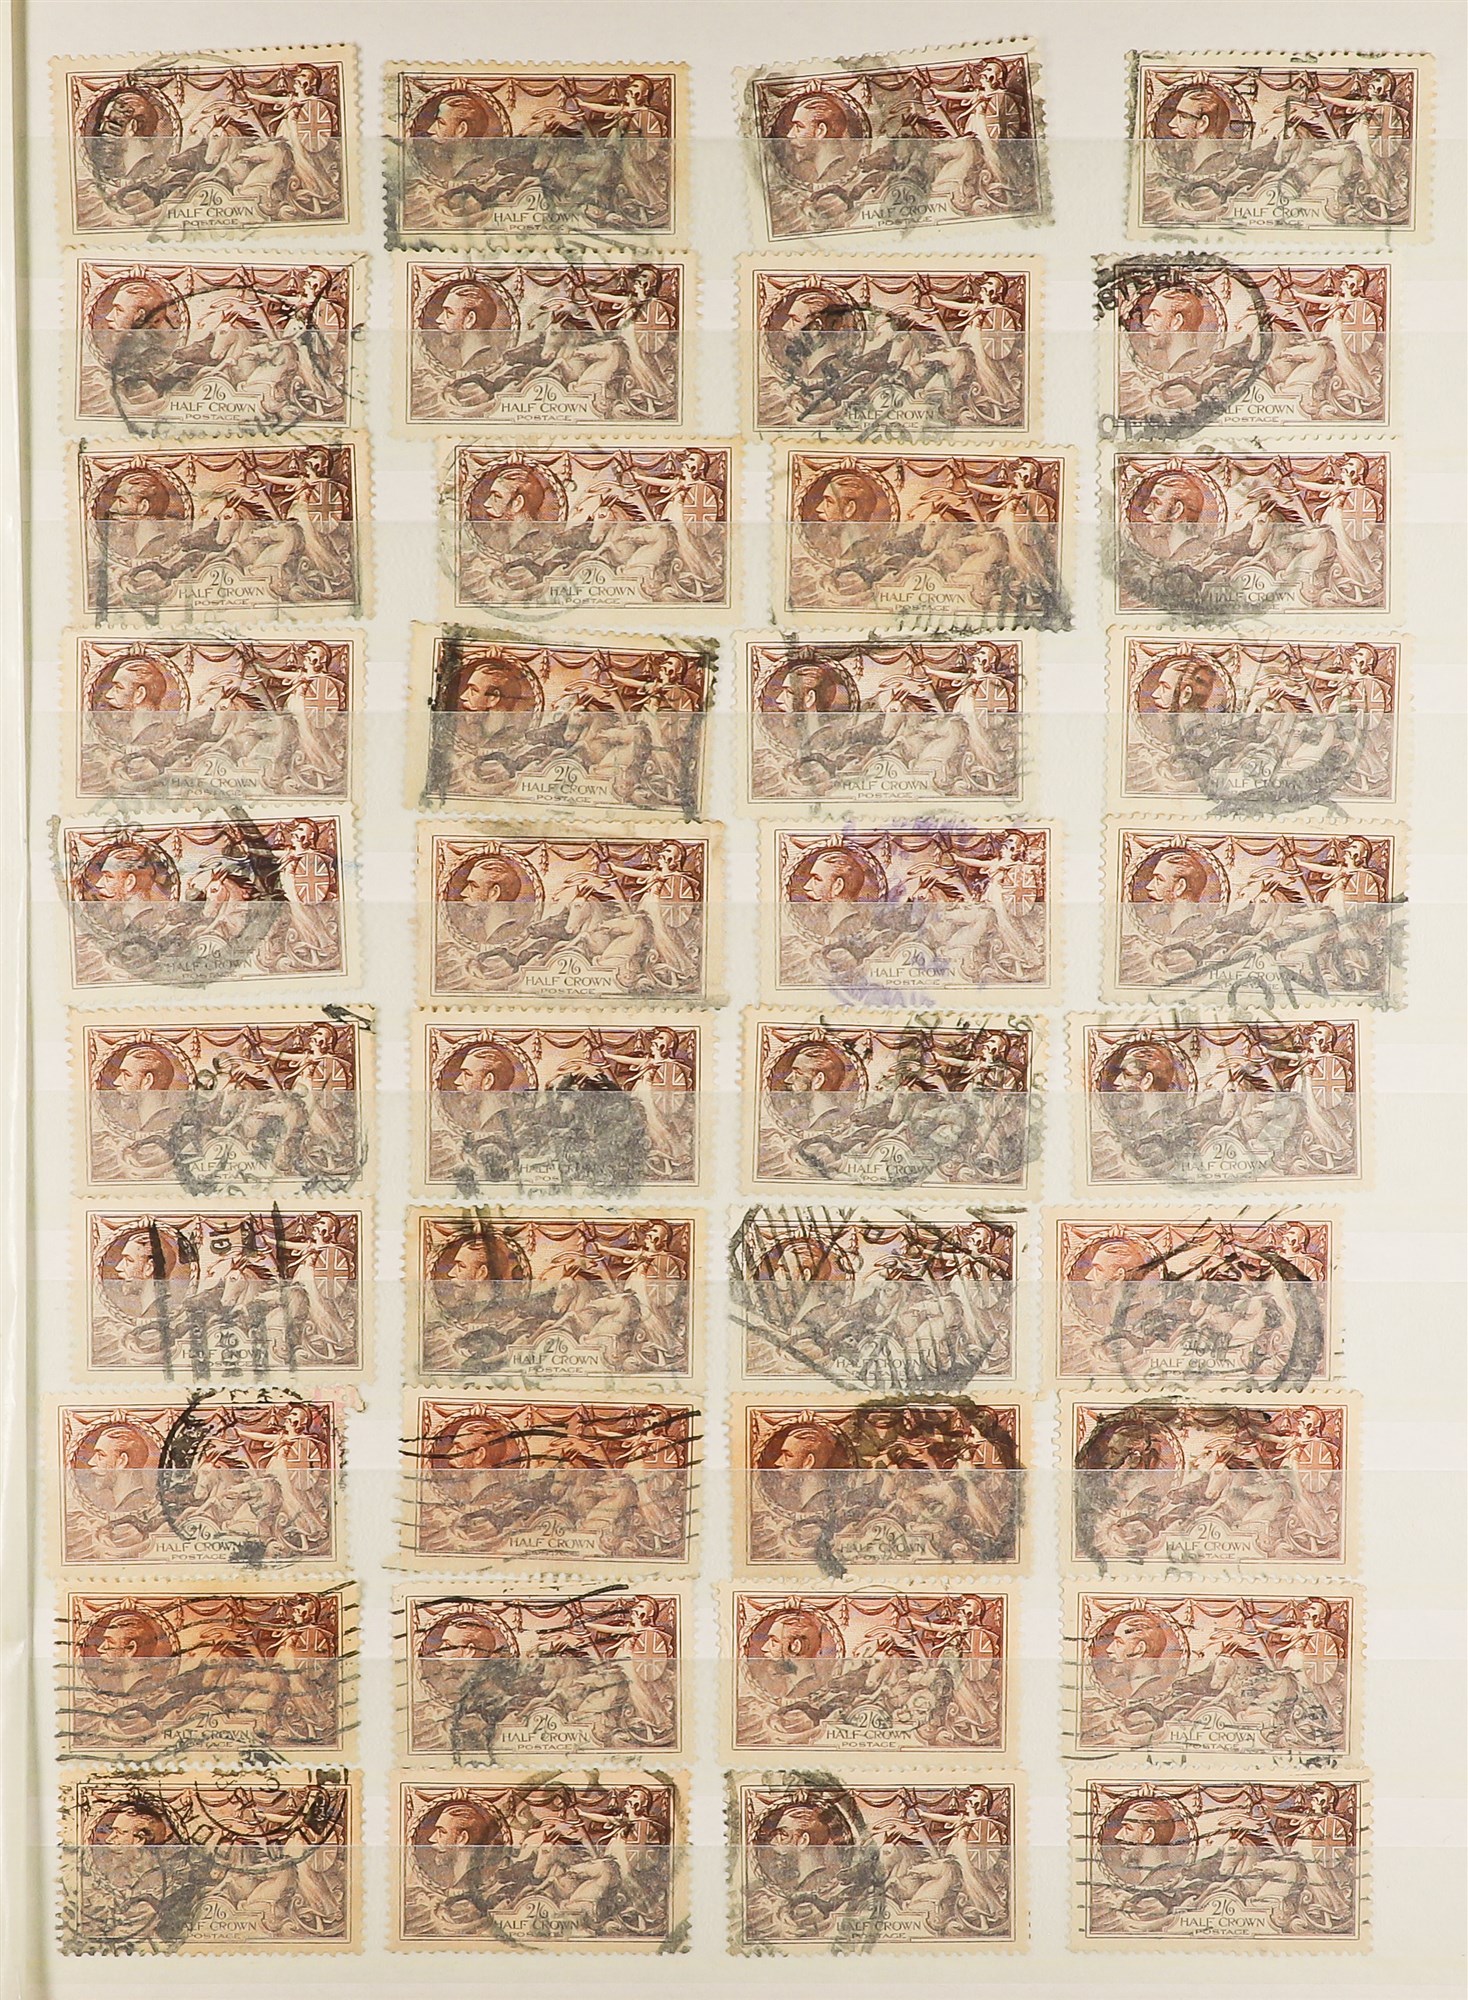 GB.GEORGE V 1934 RE-ENGRAVED SEAHORSES approx 600 used examples - 2s6d browns (440+), 5s rose- - Image 3 of 16